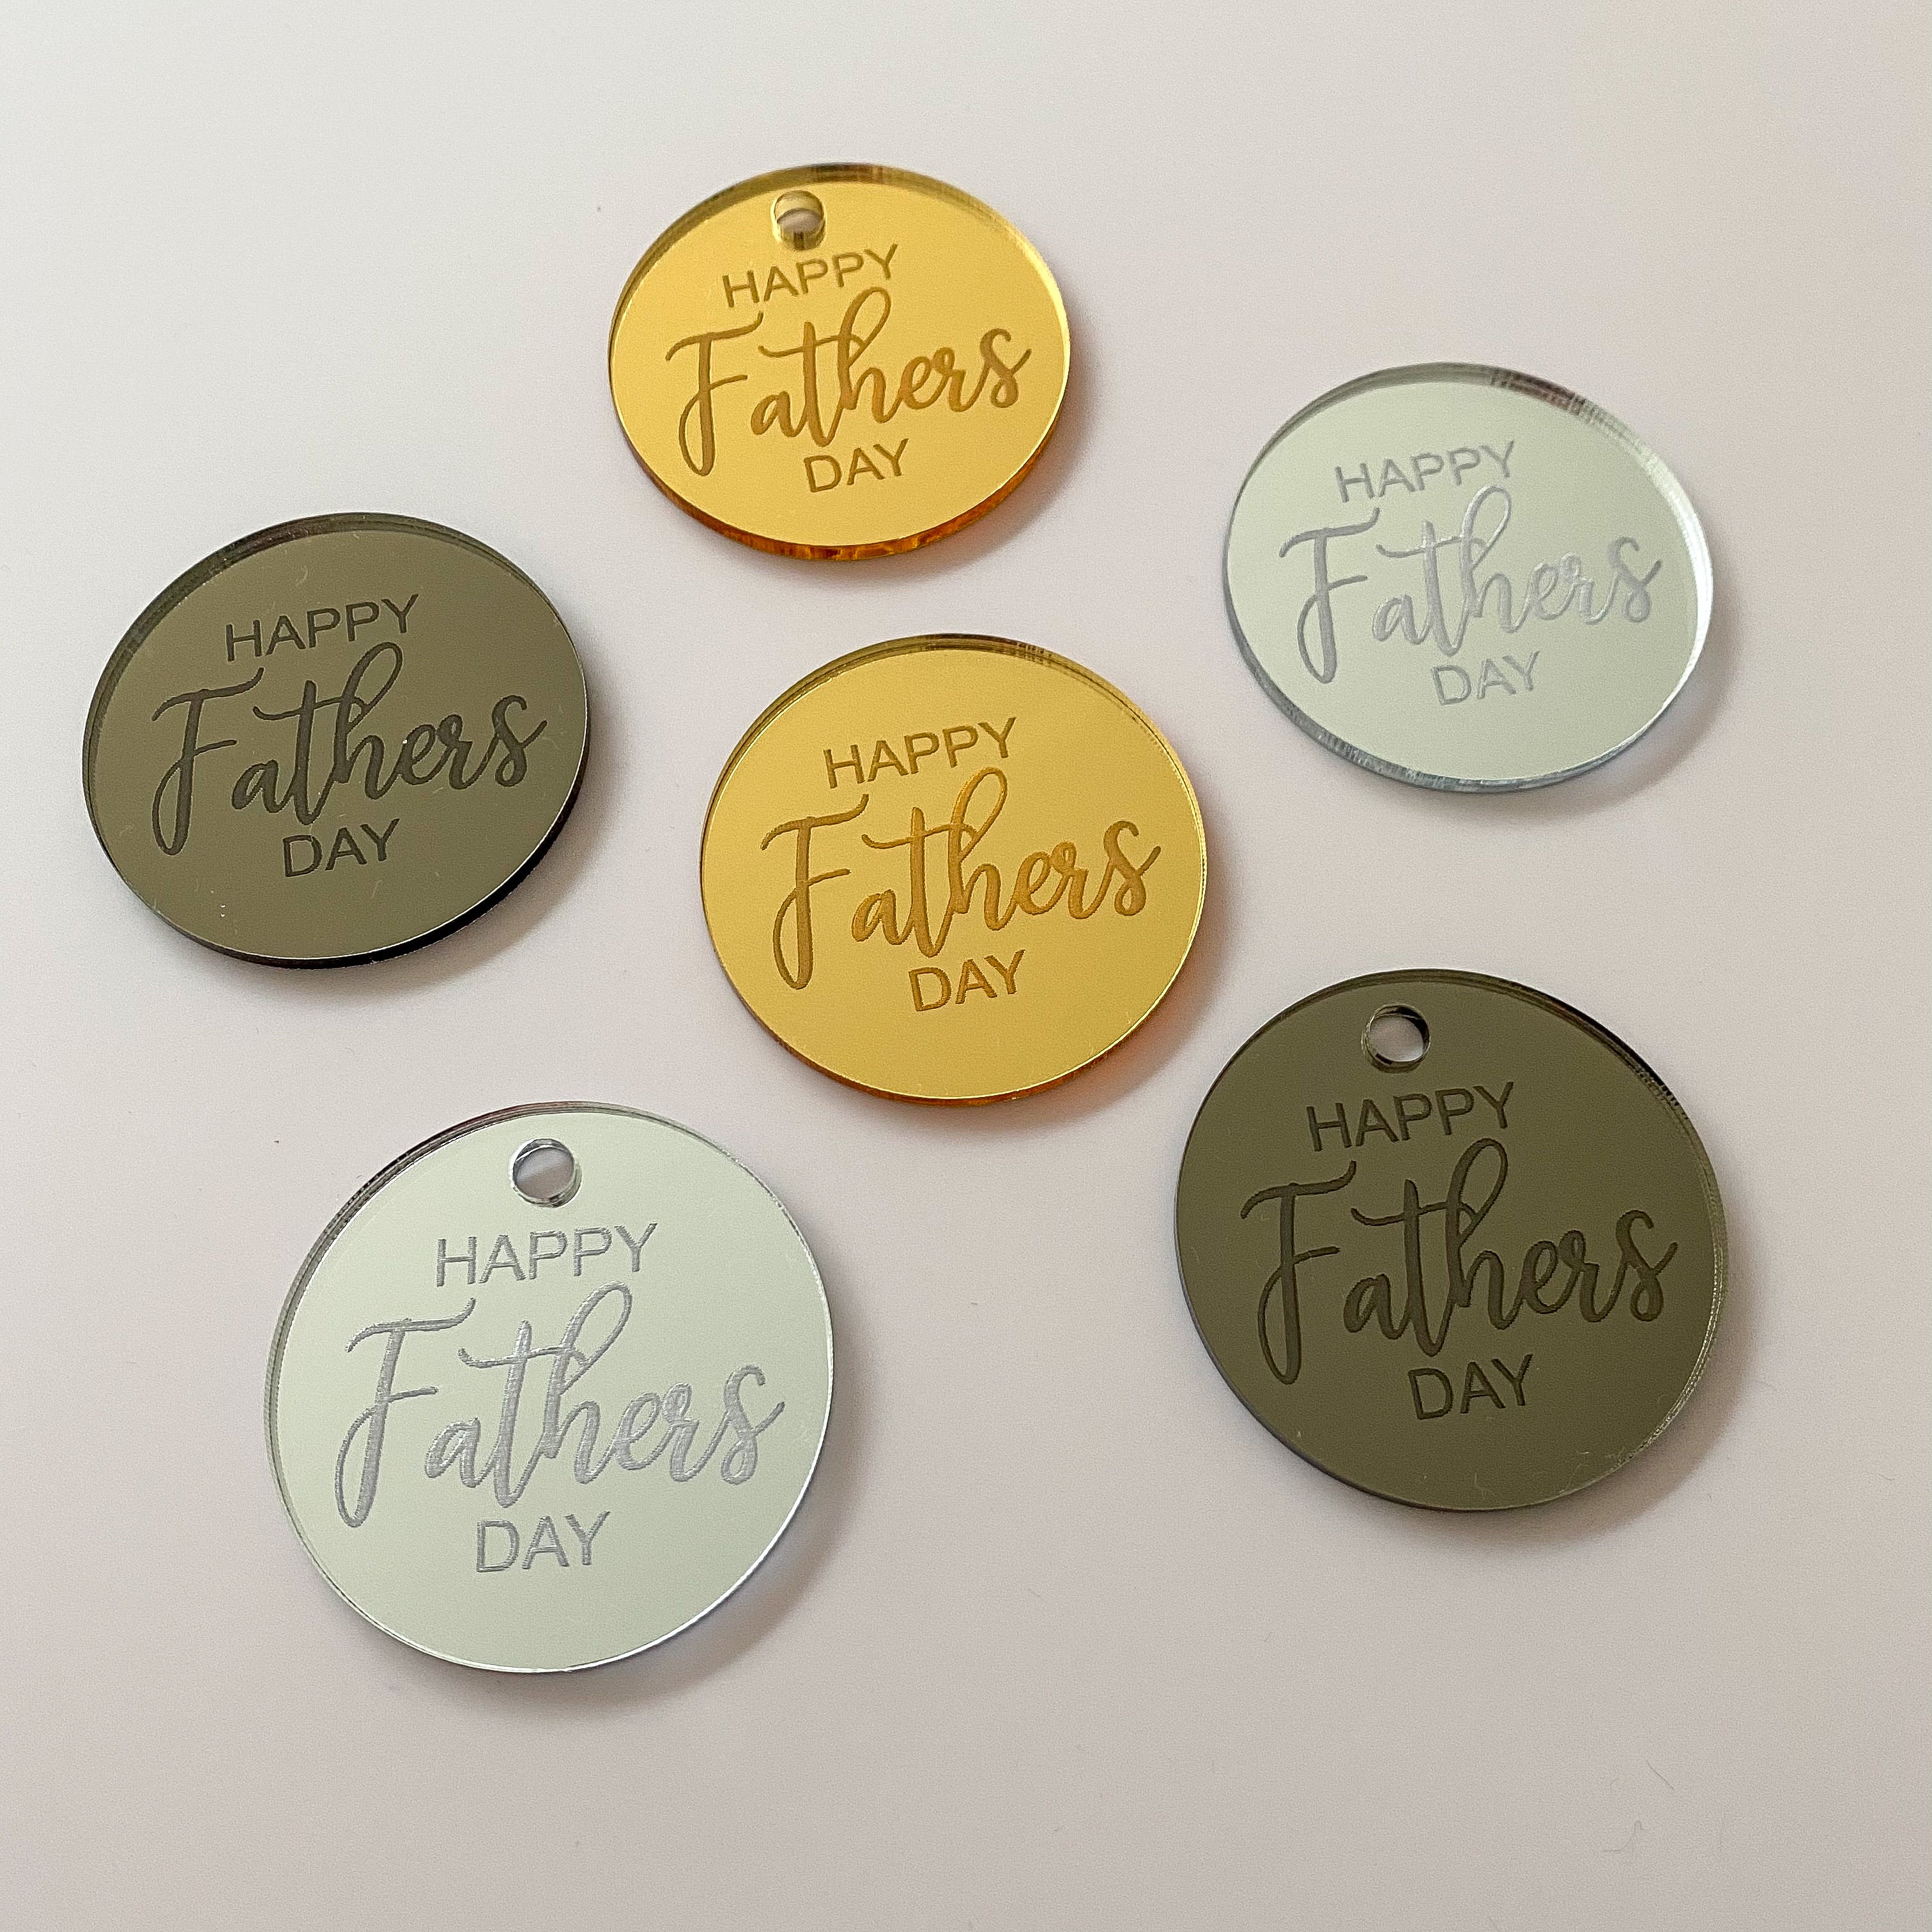 Happy Fathers Day - Mirrored Discs (Pack of 10)